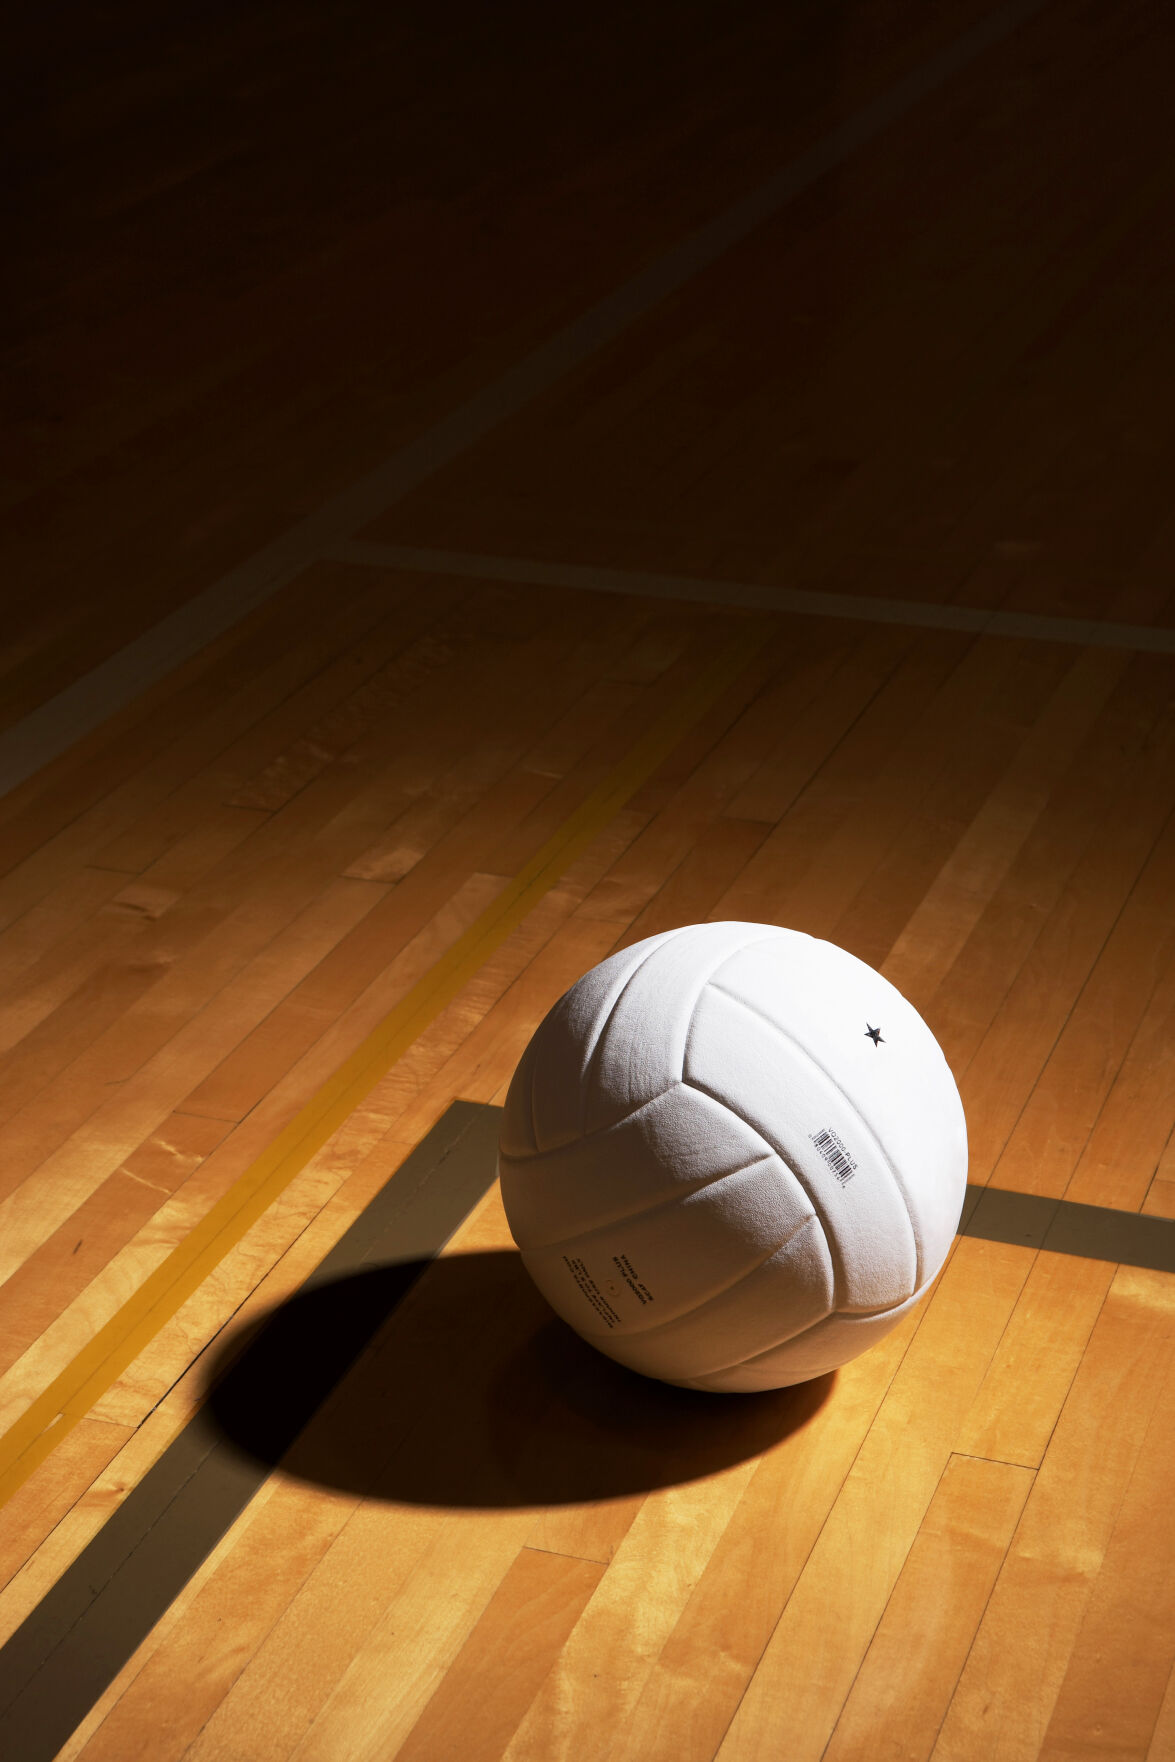 Area volleyball players selected on SWC teams